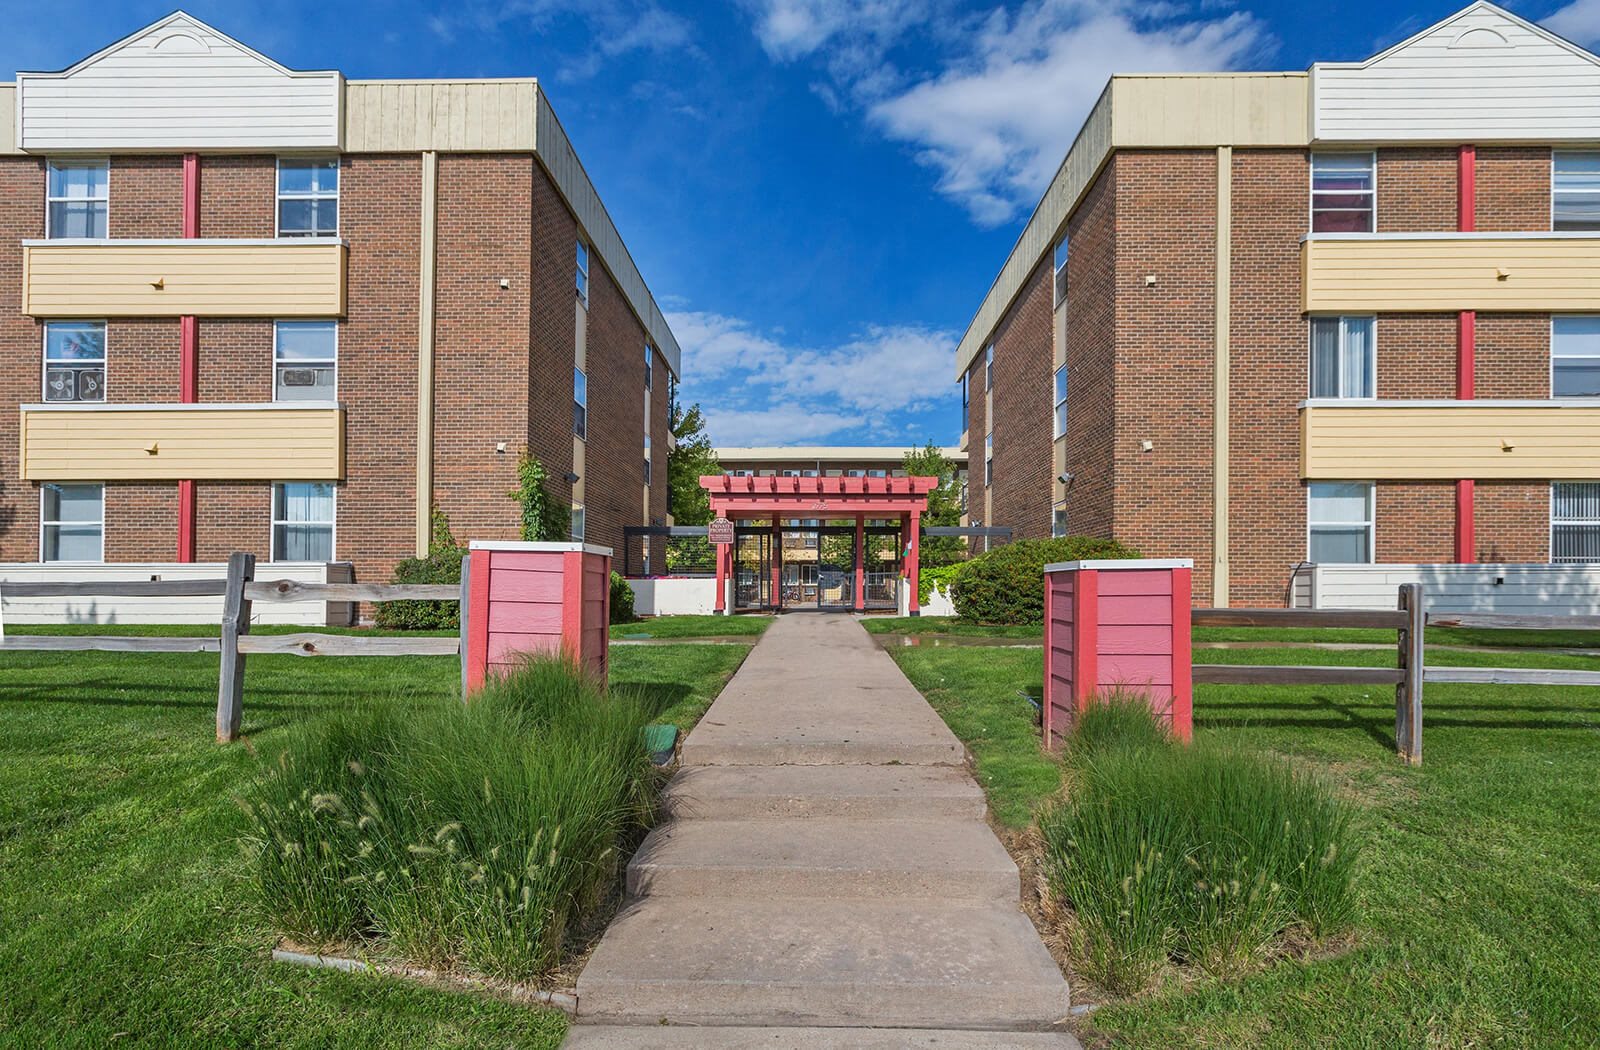 Exterior of Denver apartment building with grassy lawn